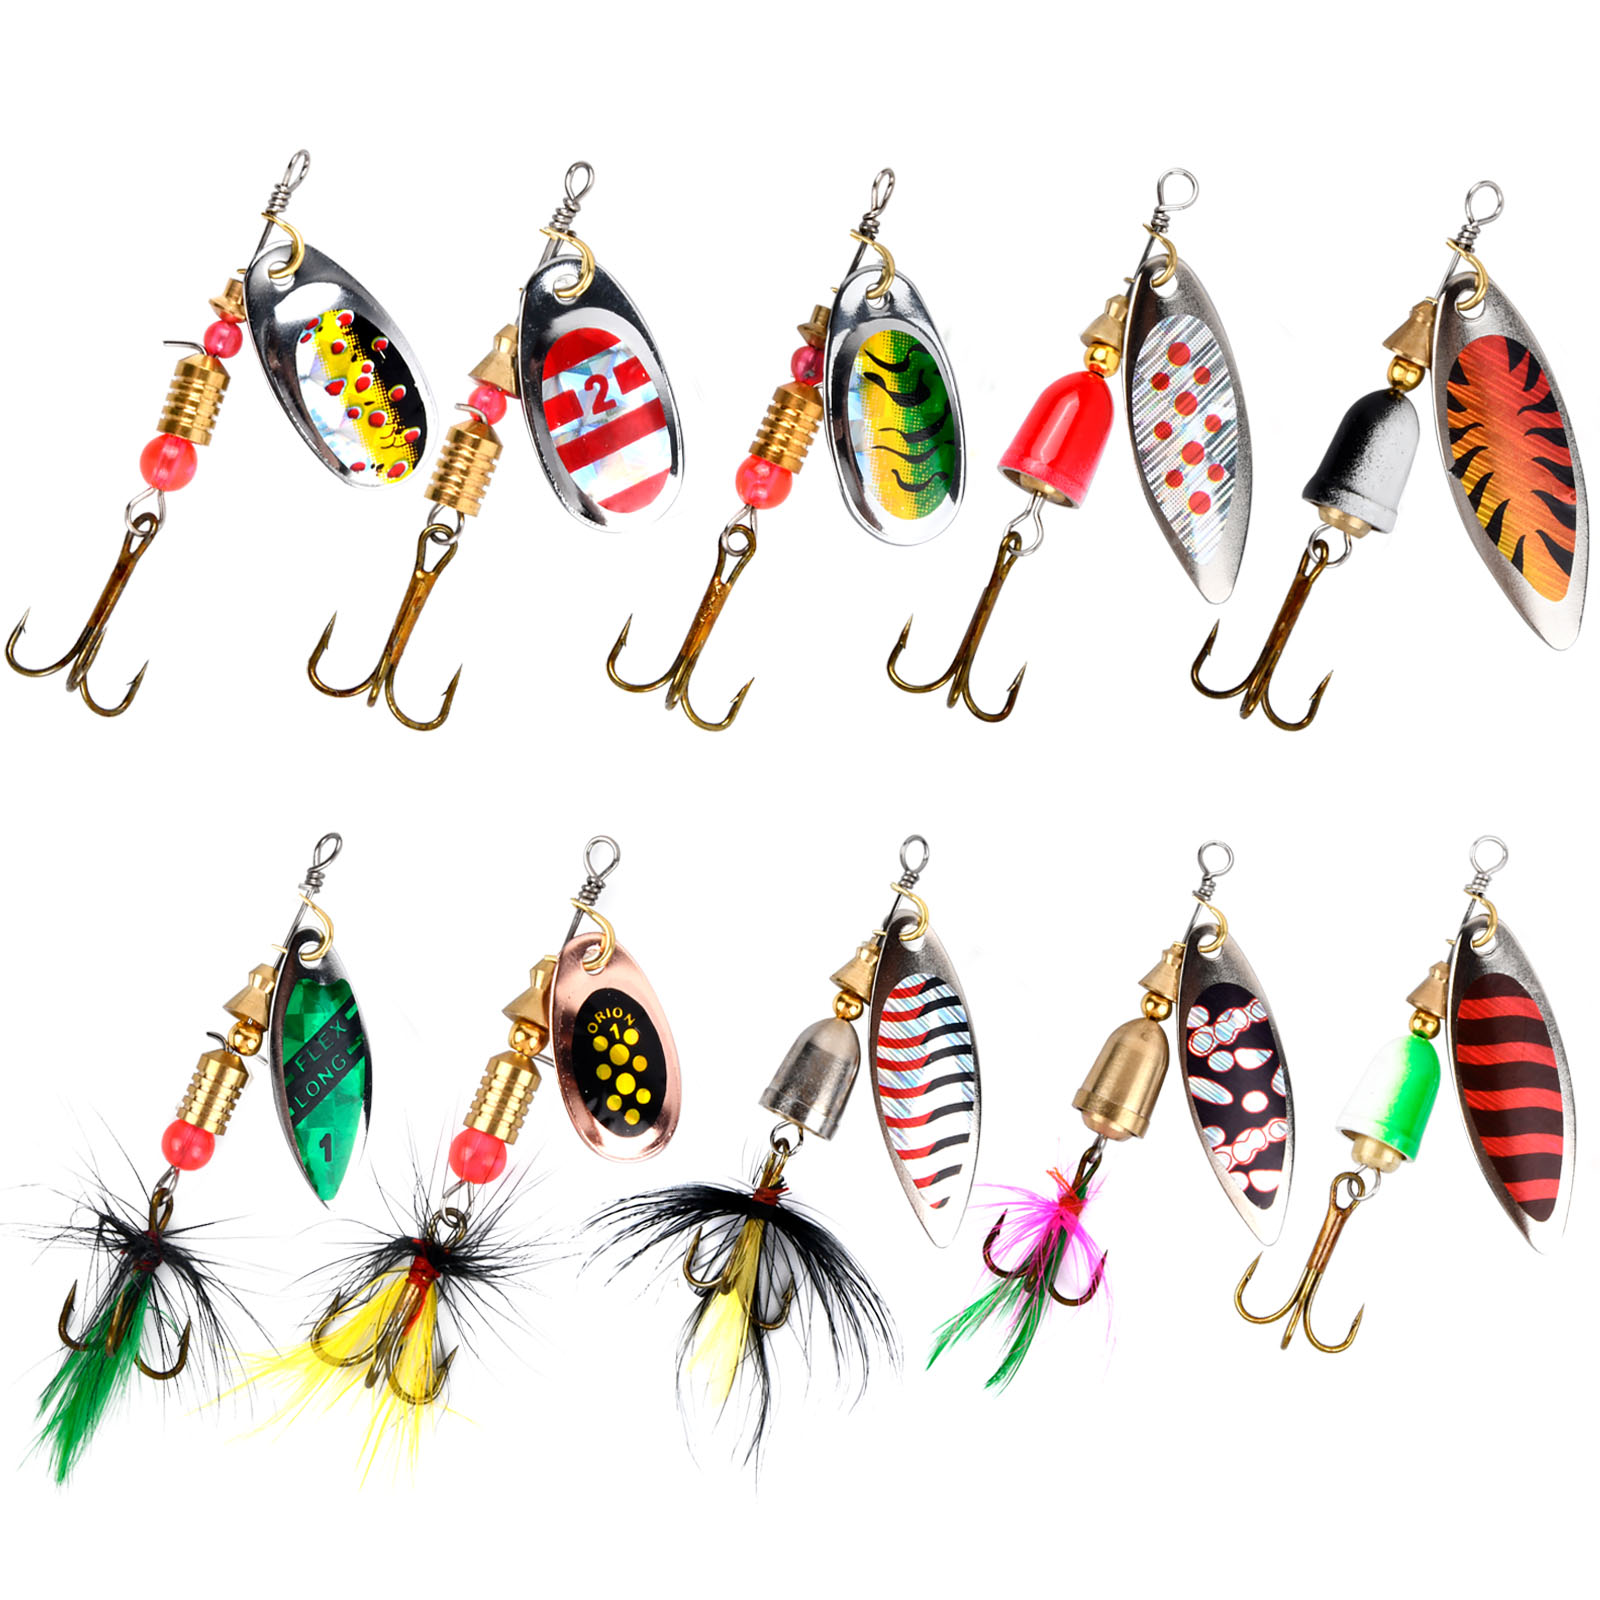 10pcs Fishing Lures Bass Spoon Trout Salmon Metal Spinner Baits+